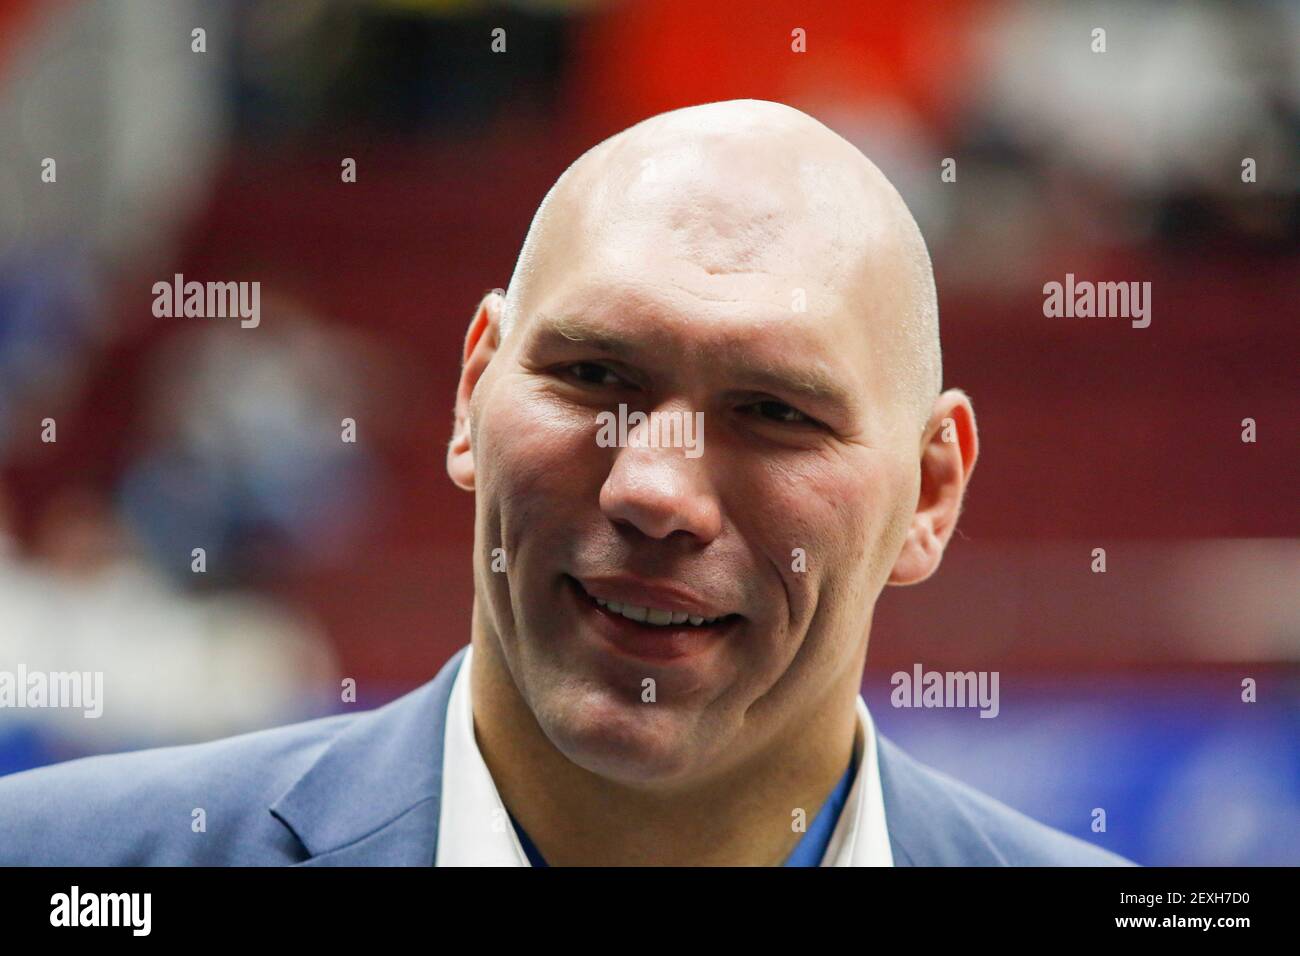 Saint Petersburg, Russia. 04th Mar, 2021. Russian boxer, Deputy of the State Duma of the Russian Federation, Nikolai Valuev seen during the 2020/2021 Turkish Airlines EuroLeague Regular Season Round 28, match between BC Real Madrid and Zenit St. Petersburg at the Sibur Arena. (Final score; Zenit St. Petersburg 71:75 Real Madrid) Credit: SOPA Images Limited/Alamy Live News Stock Photo